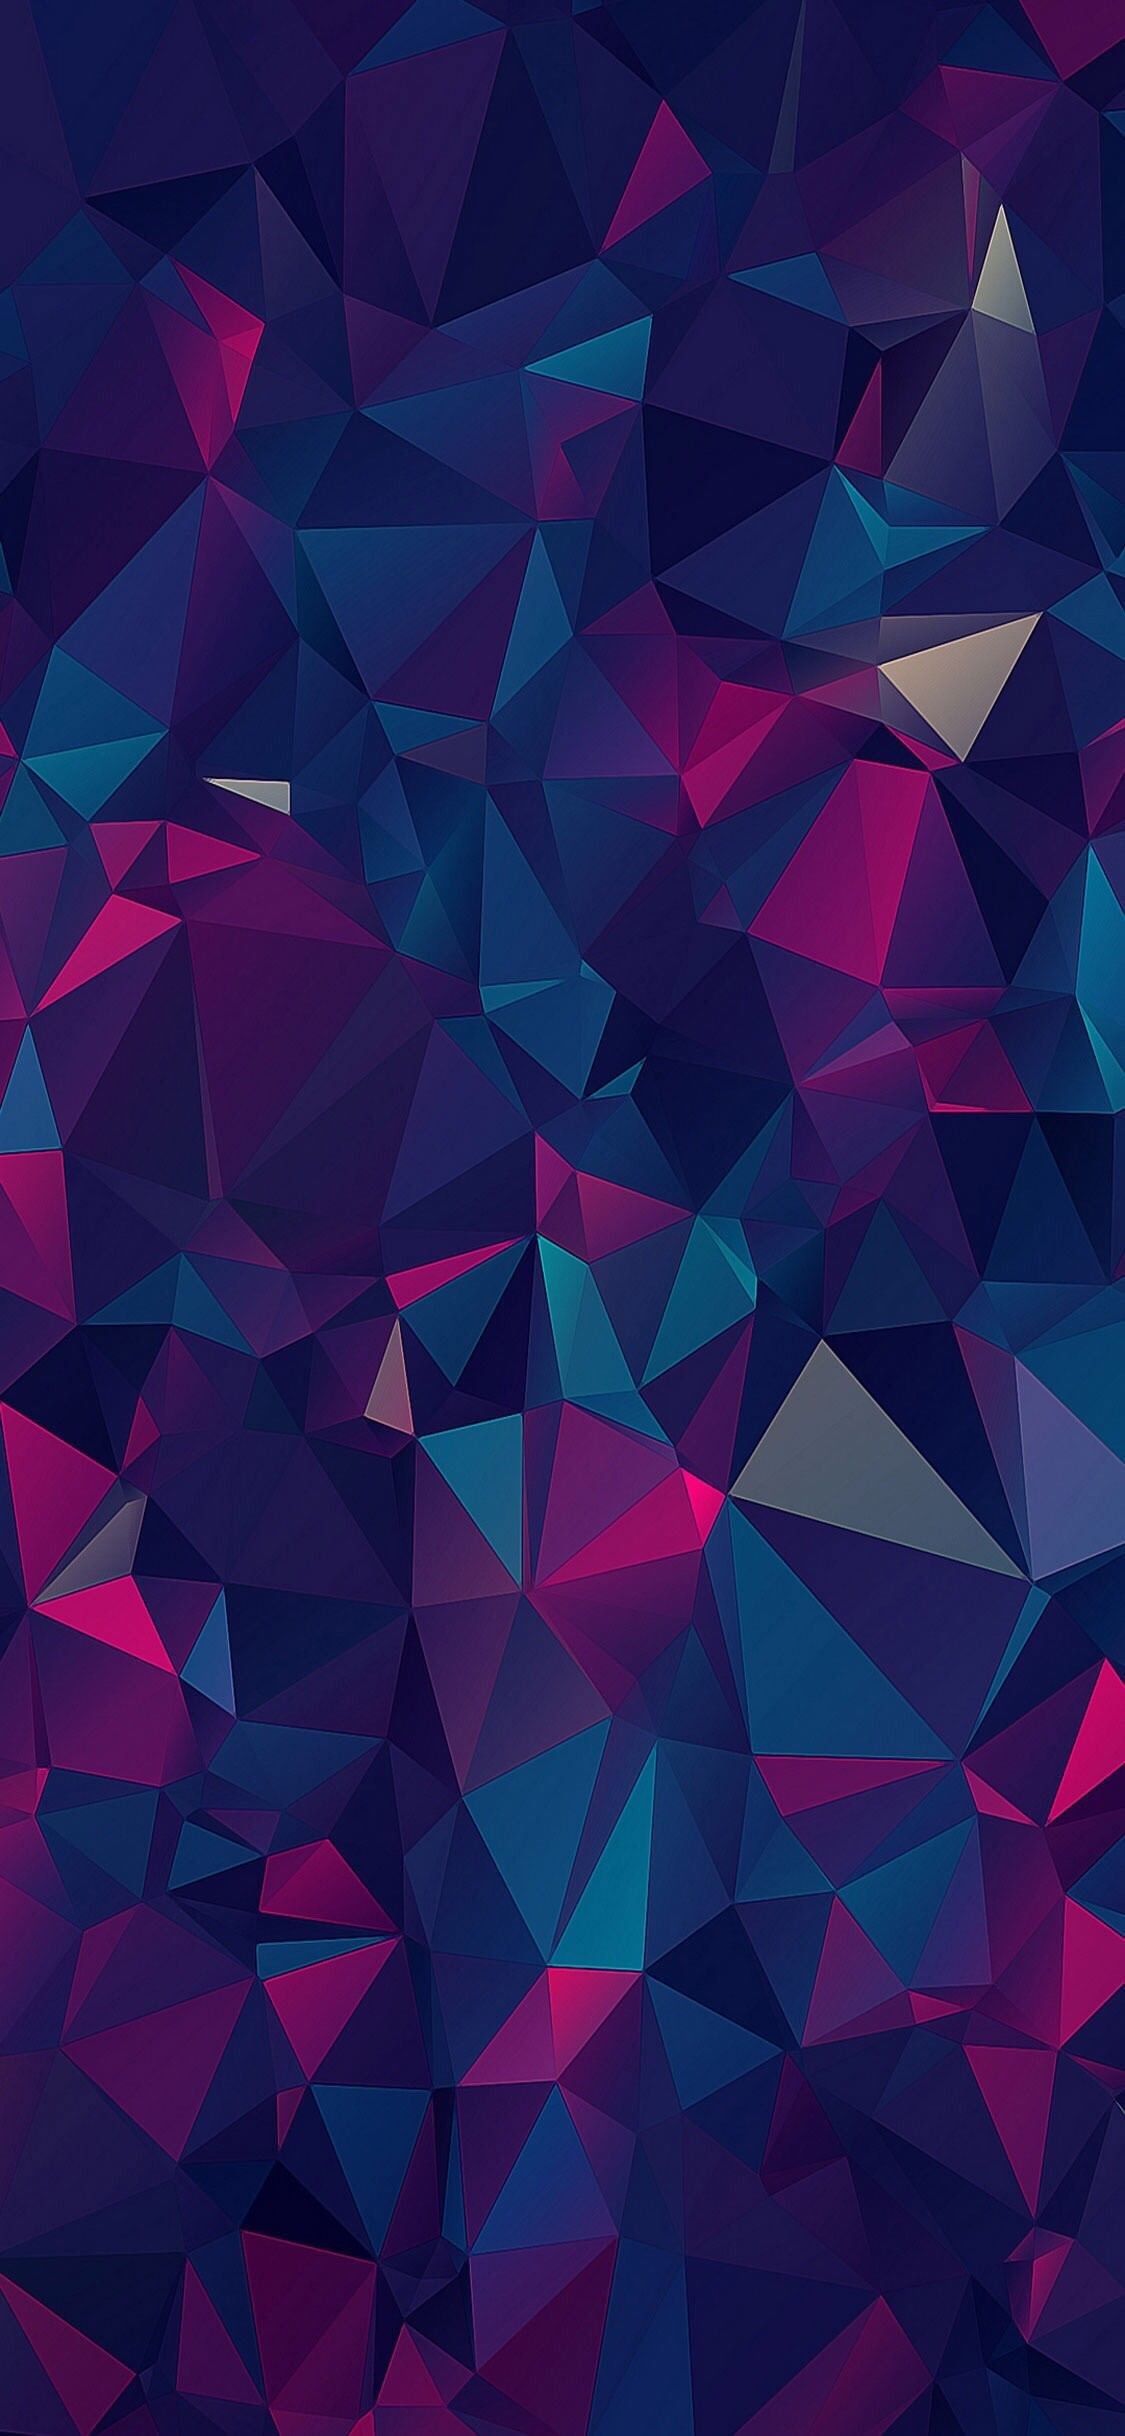 Geometric Abstract iPhone Wallpaper Free Geometric Abstract iPhone Background